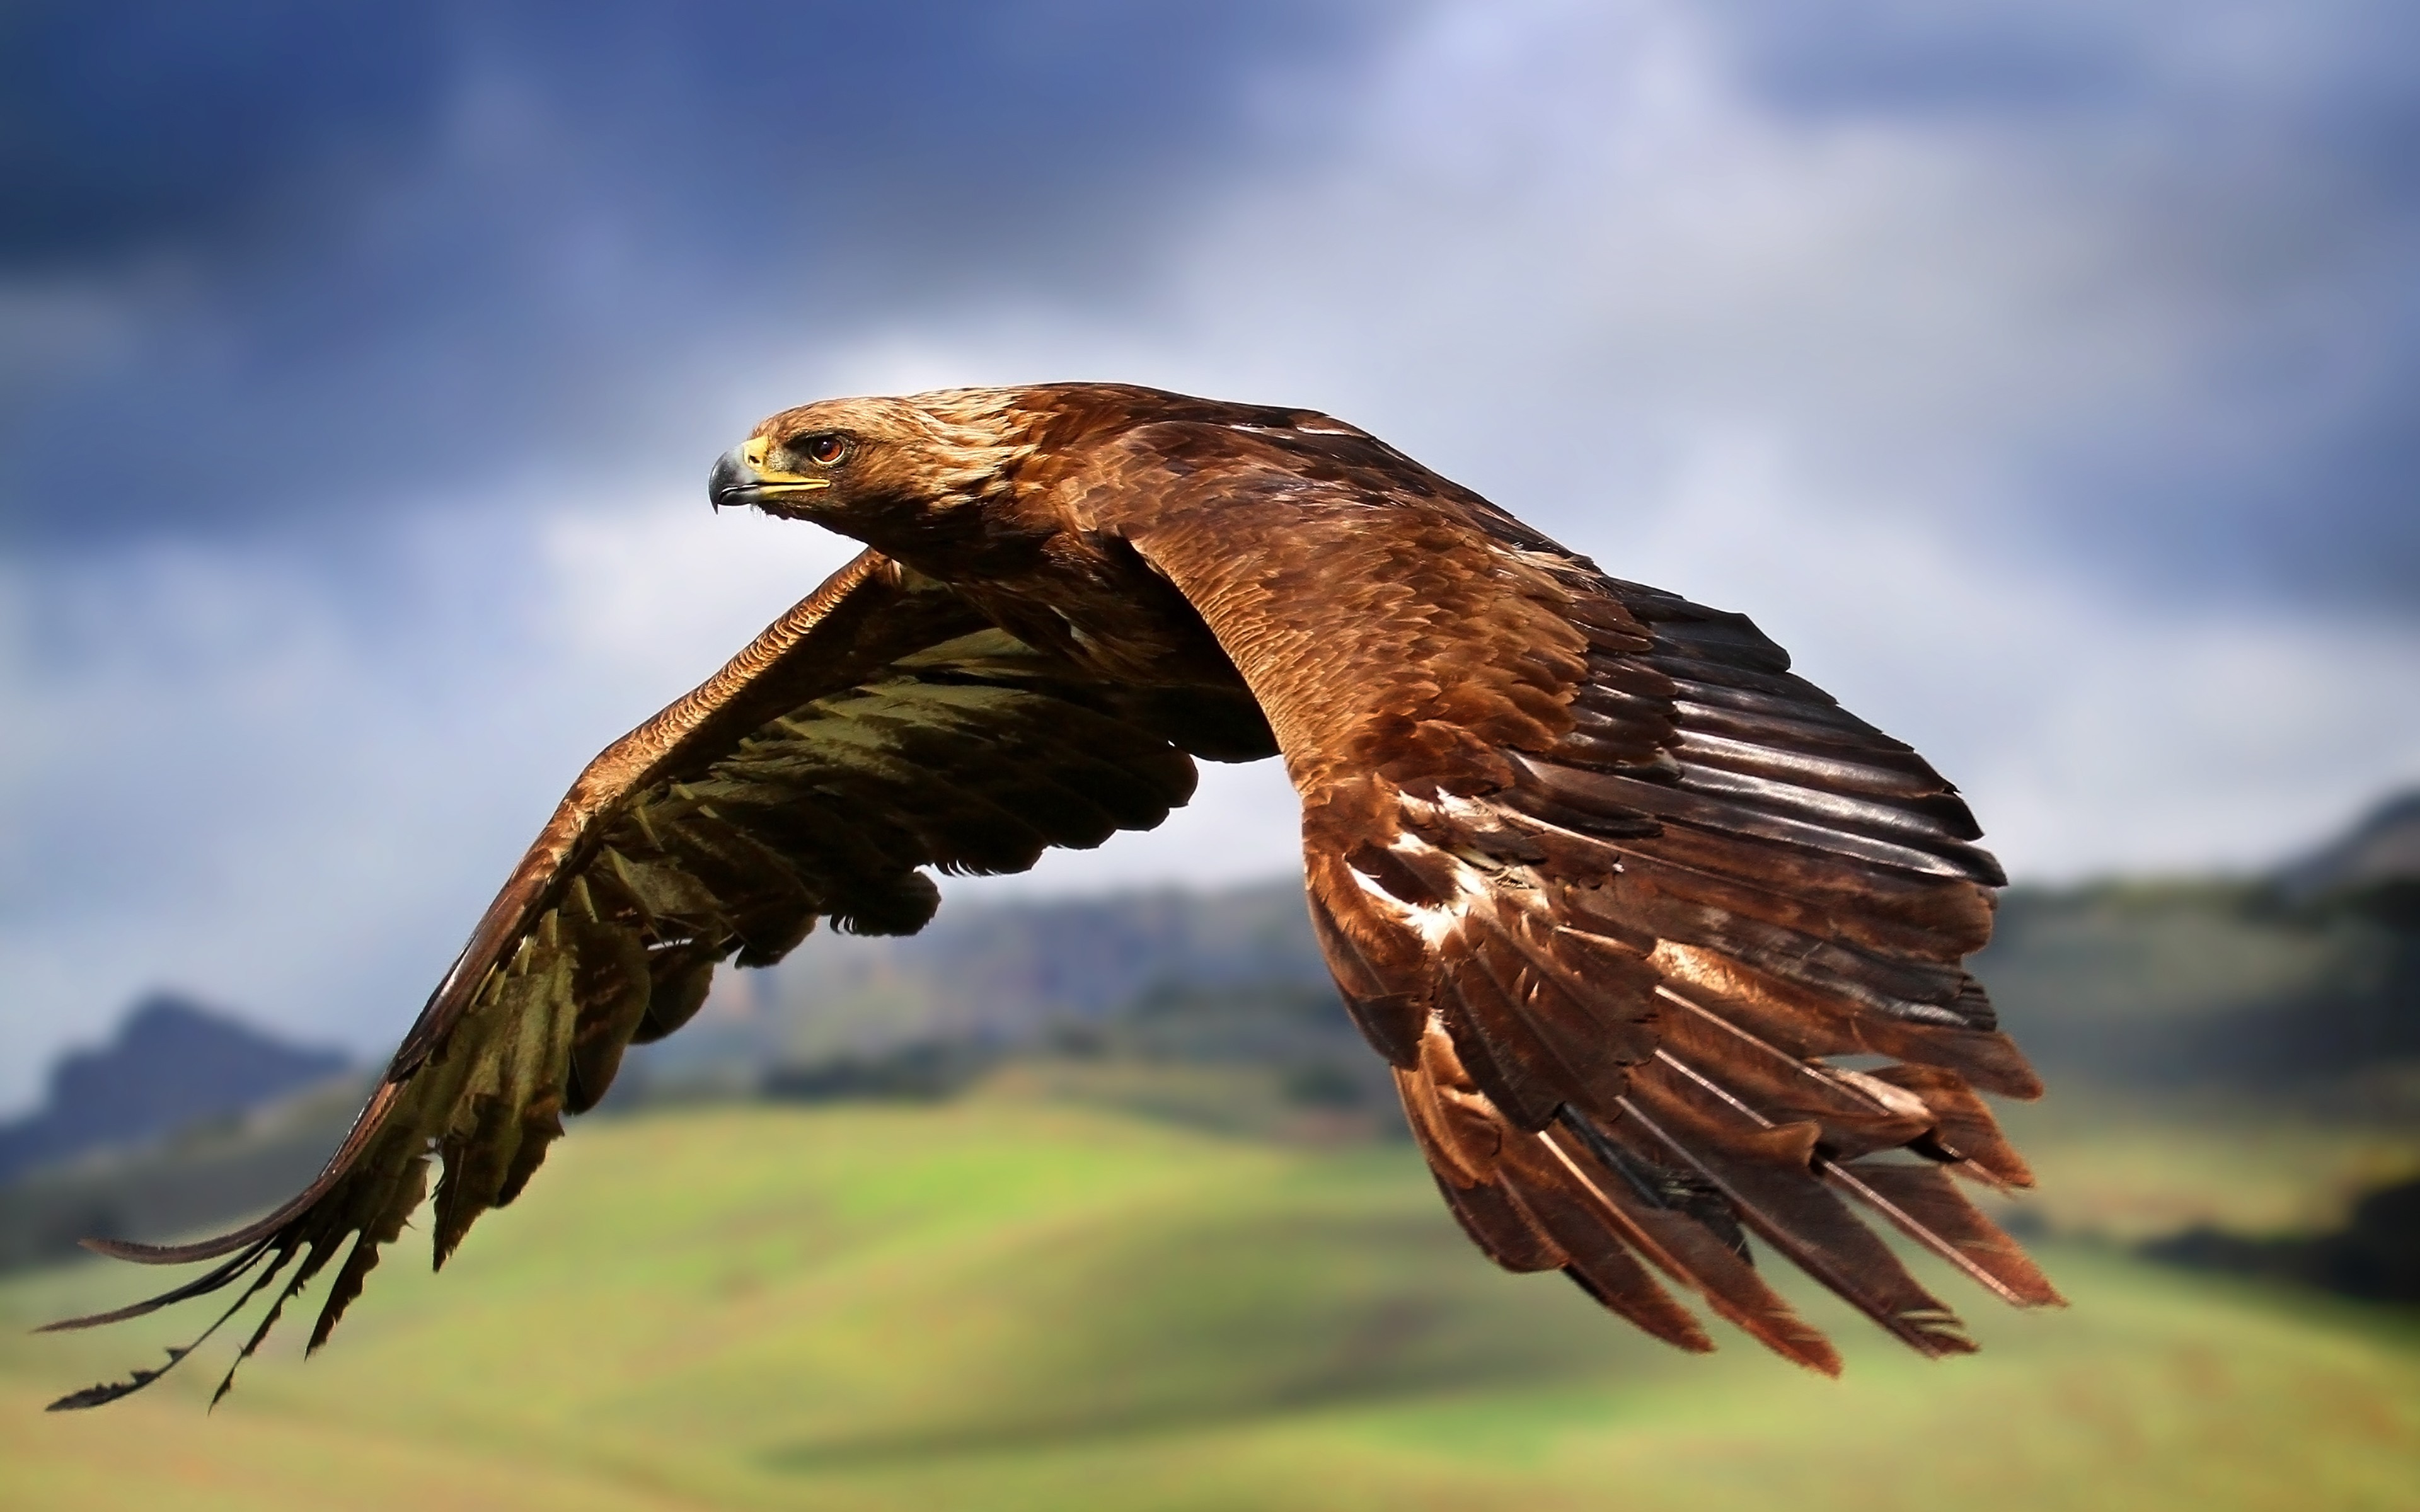 General 3840x2400 eagle birds animals wings flying